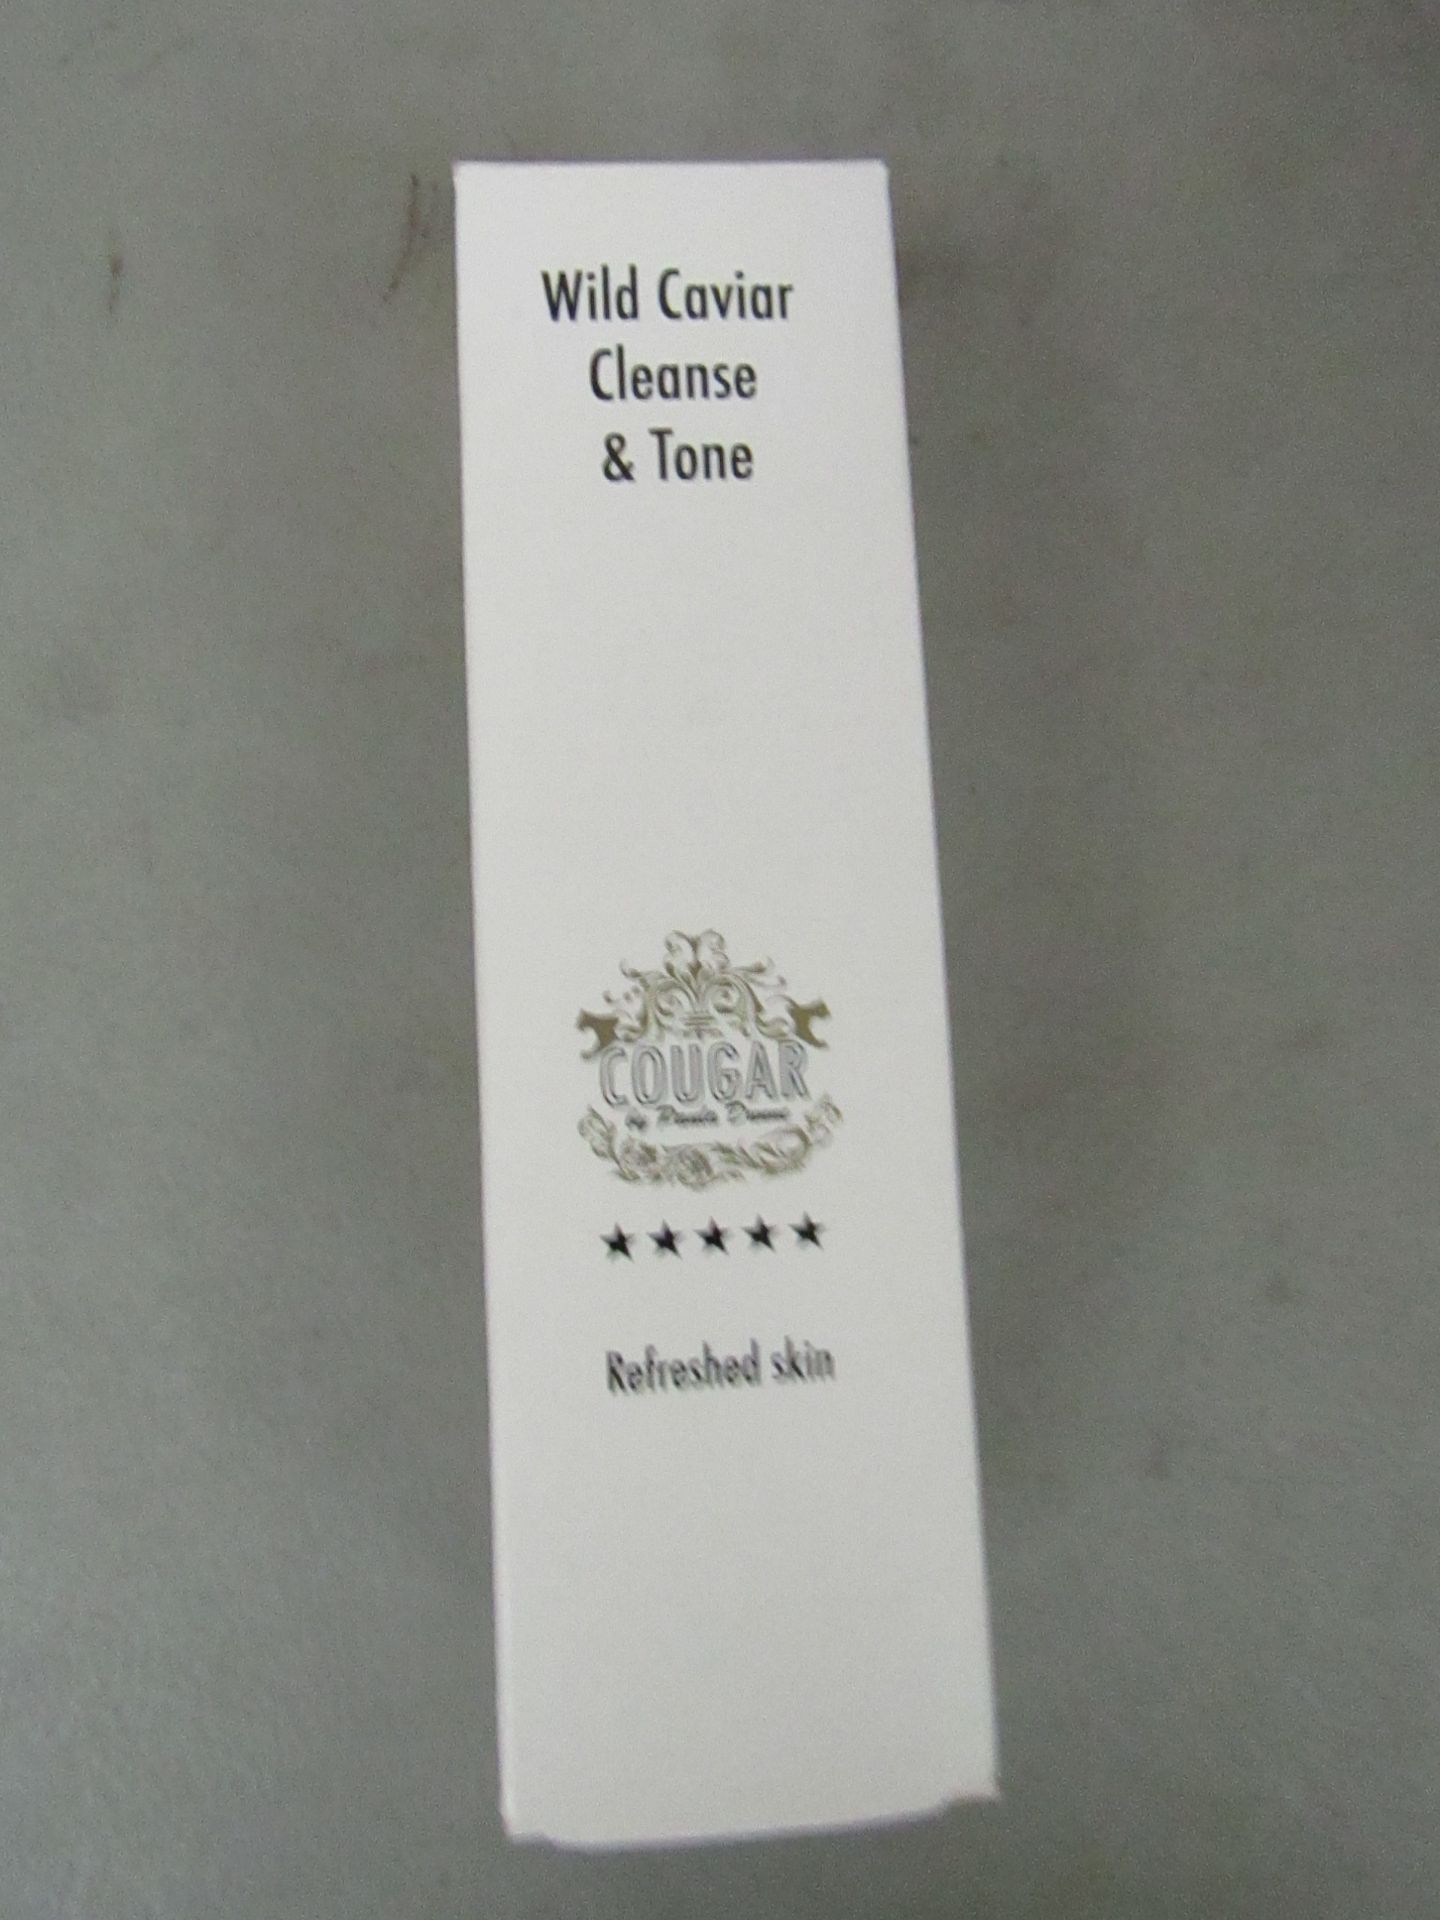 3x 100ml Bottles of Cougar wild Caviar cleanse and tone Liquid, new and boxed, BB 6 months after